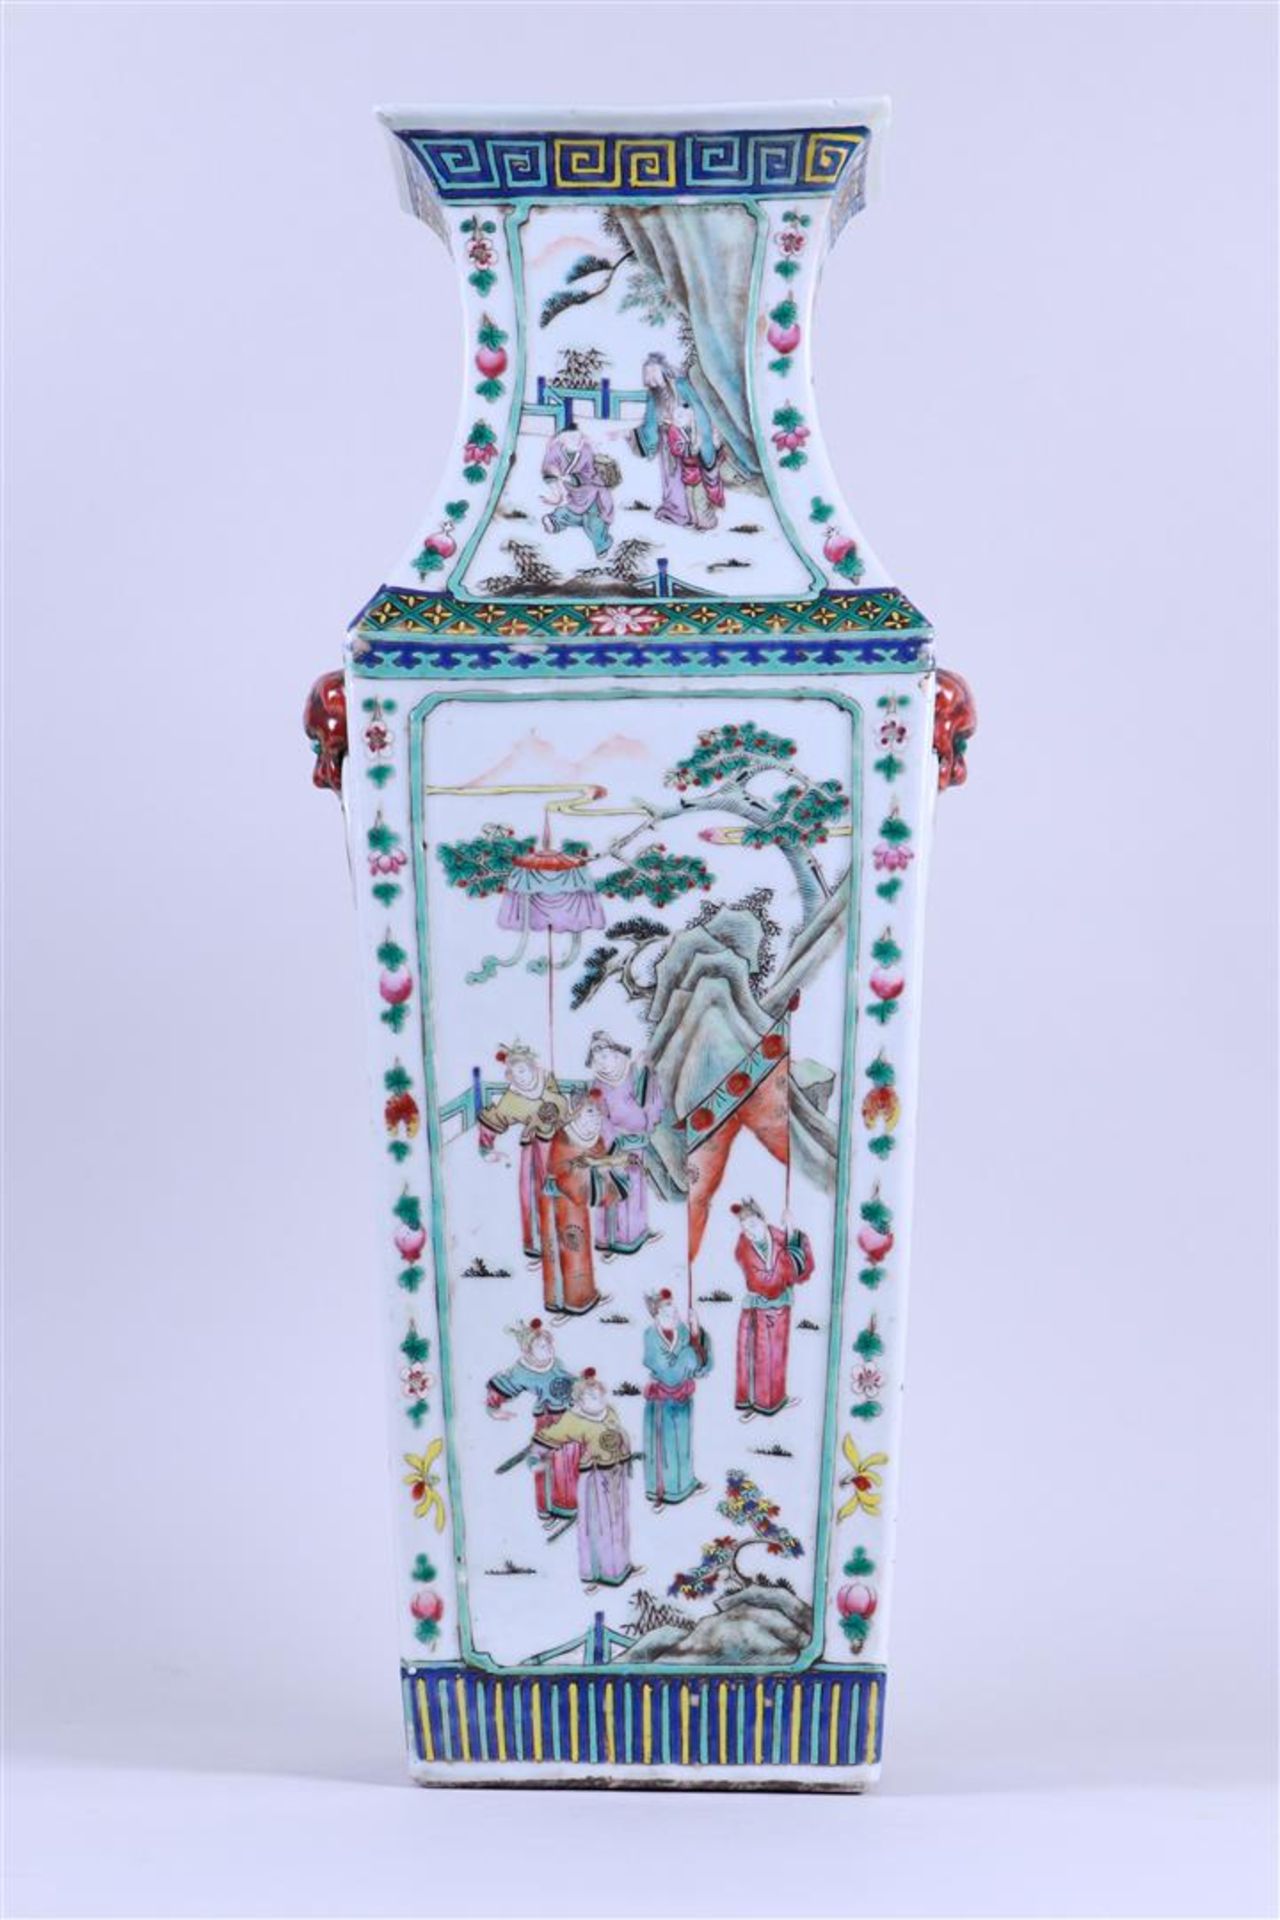 A family rose baluster vase with decor of various figures. China, 19th century.
